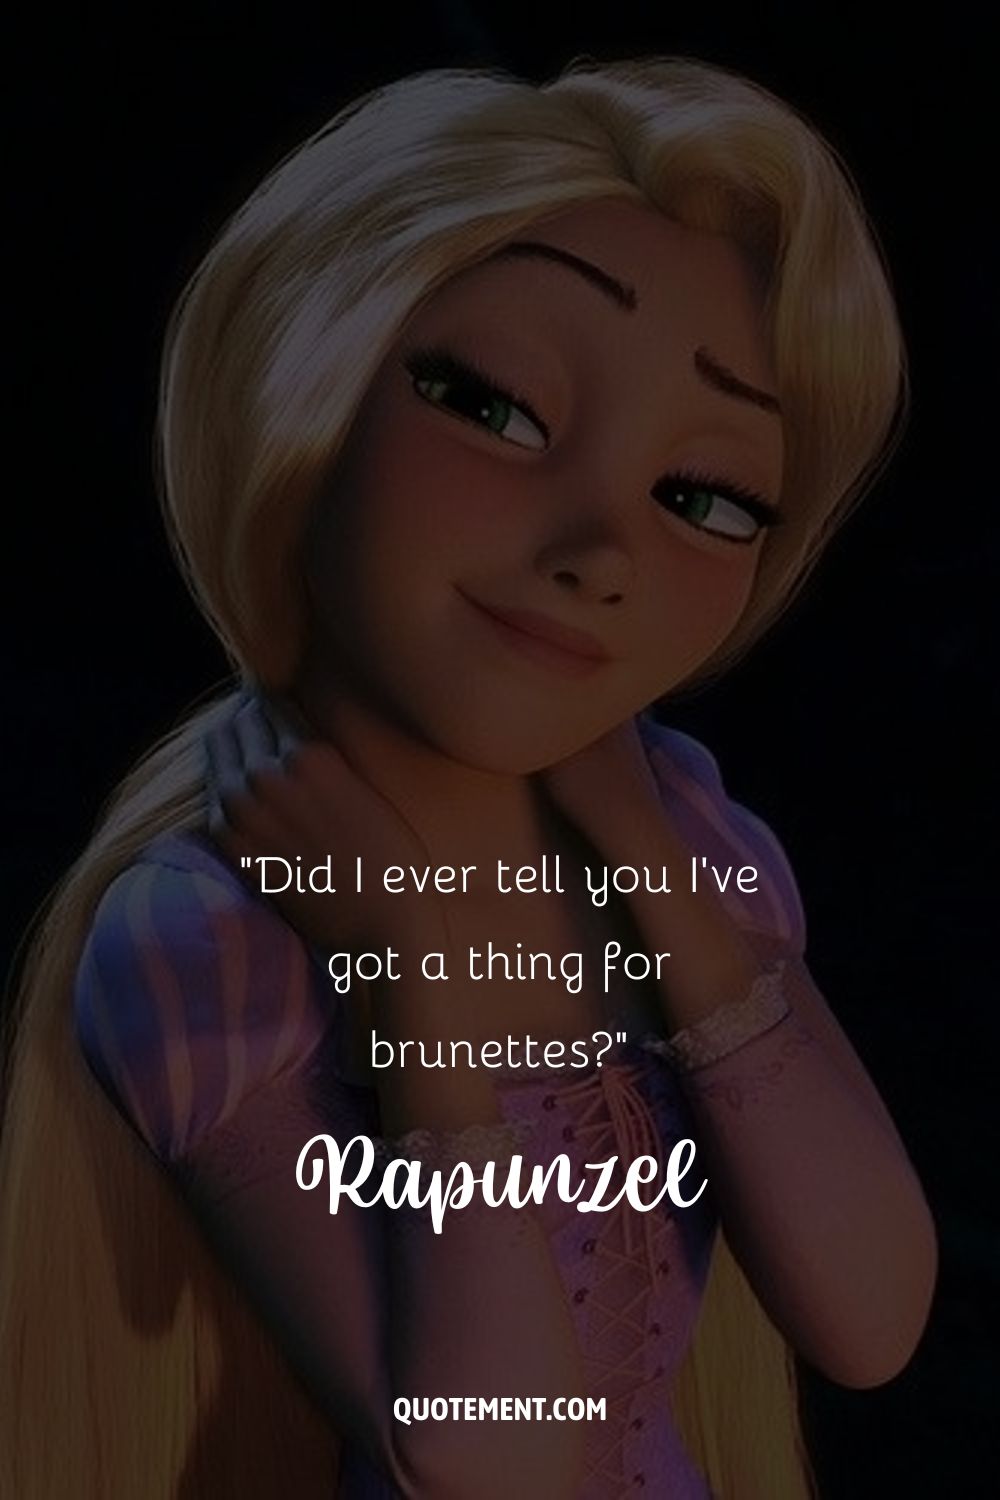 rapunzel from tangled cartoon representing flynn rider quote